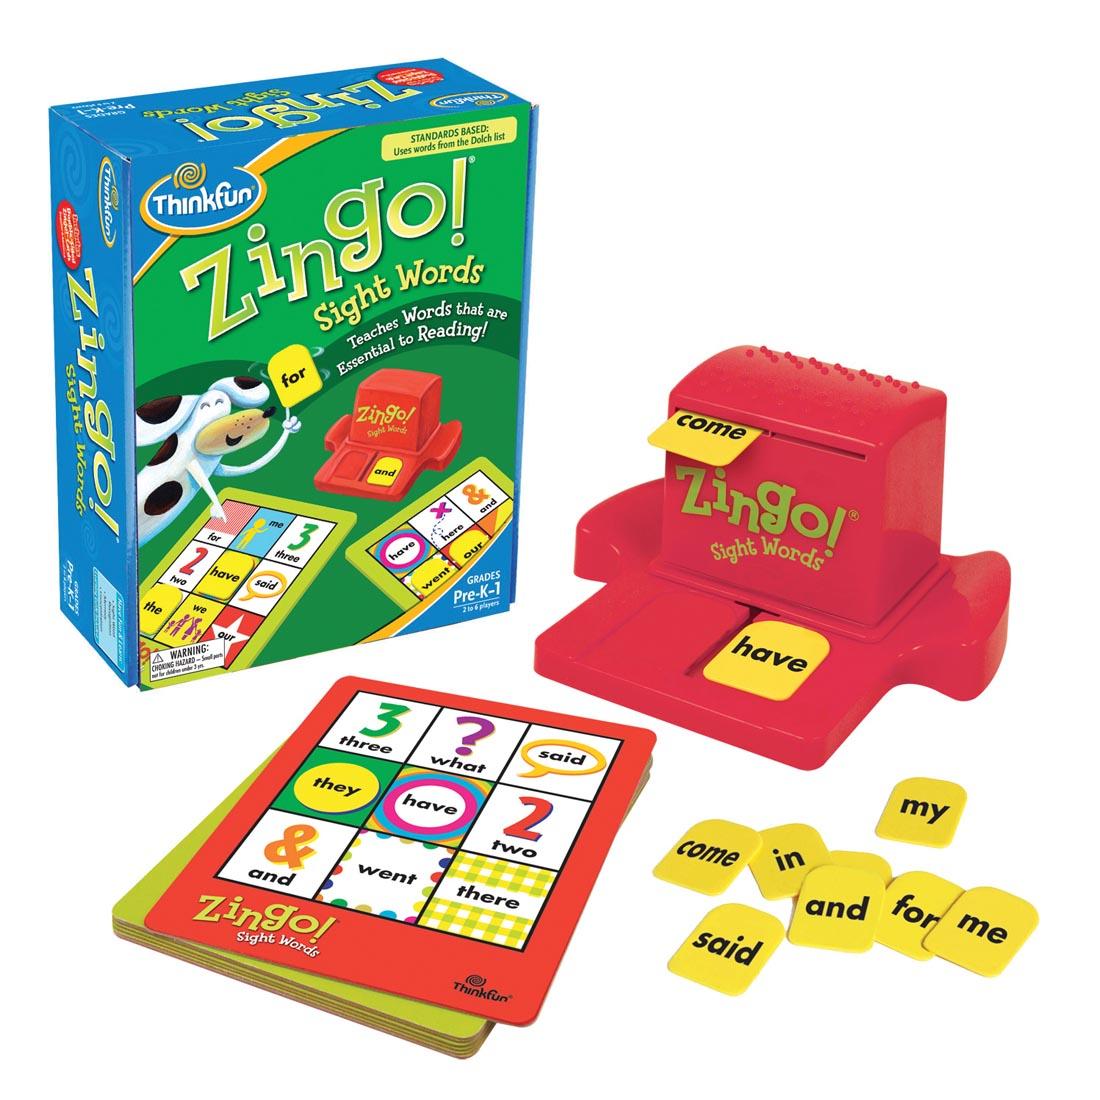 Thinkfun Zingo! SightWords shown both in and out of package